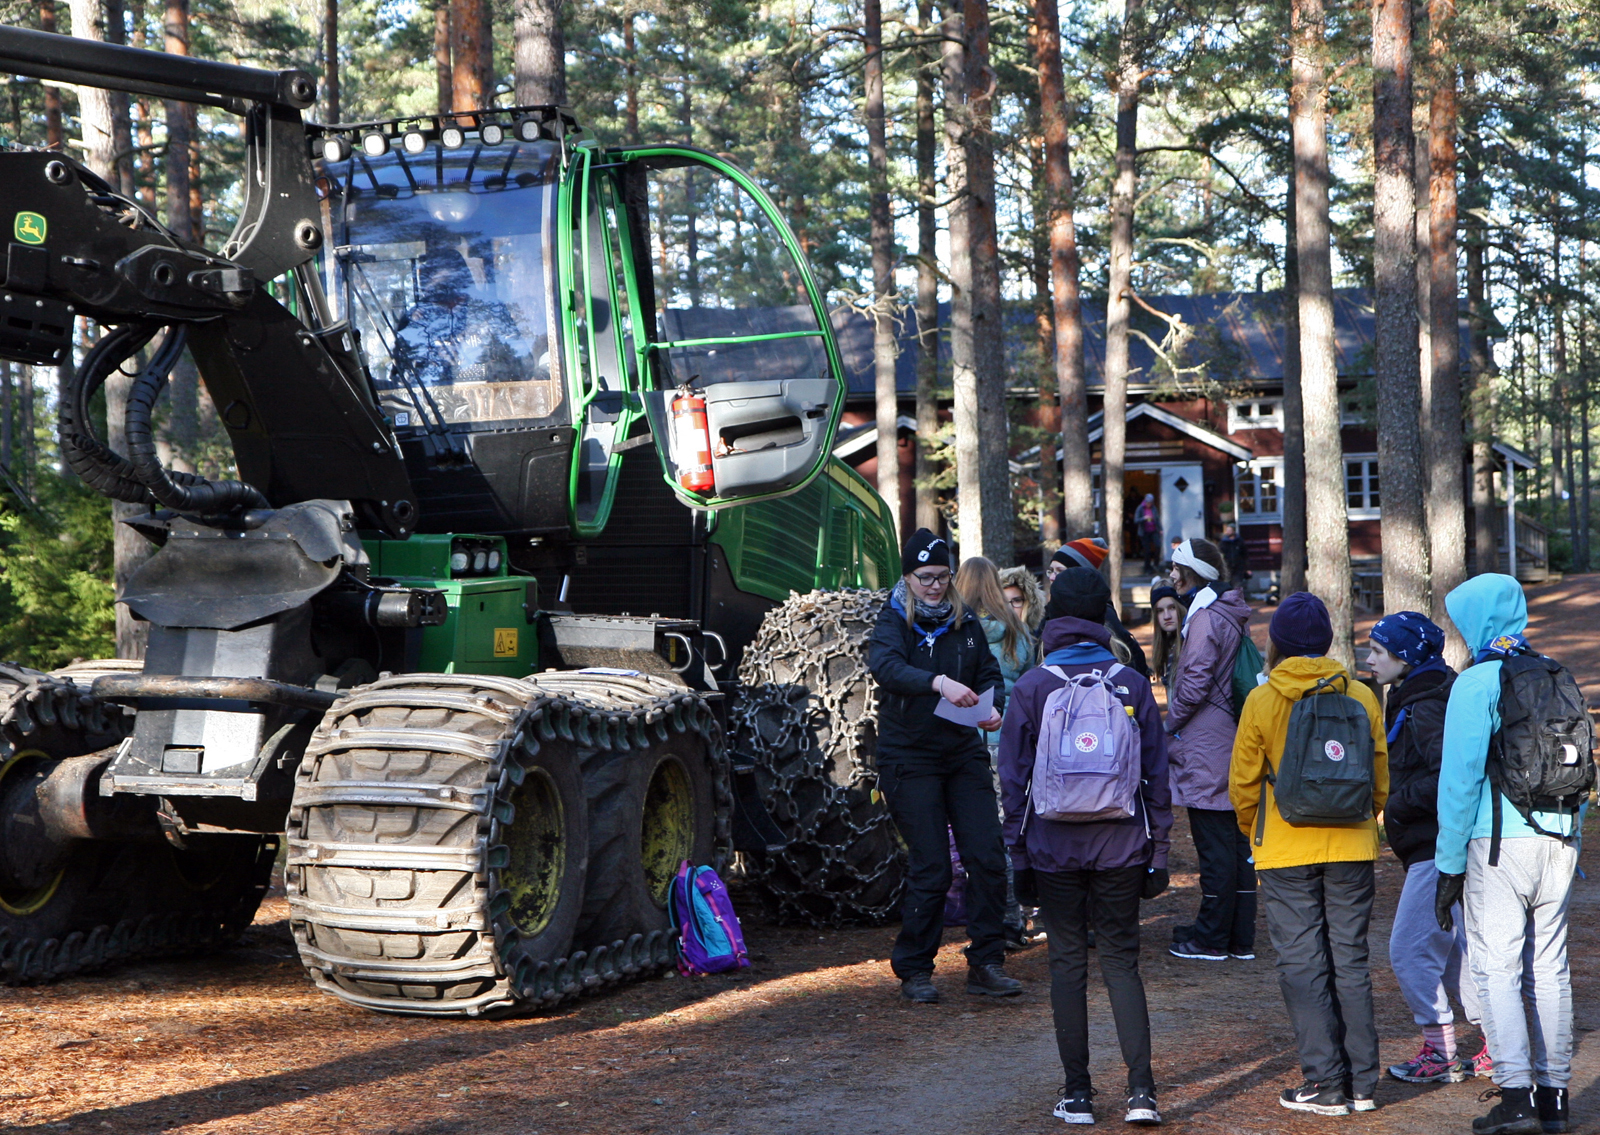 The activity trail was part of the Explo, an event organized in October in and around Salo for the Explorers, who are 15 to 17 years of age. Photo: Anna Kauppi